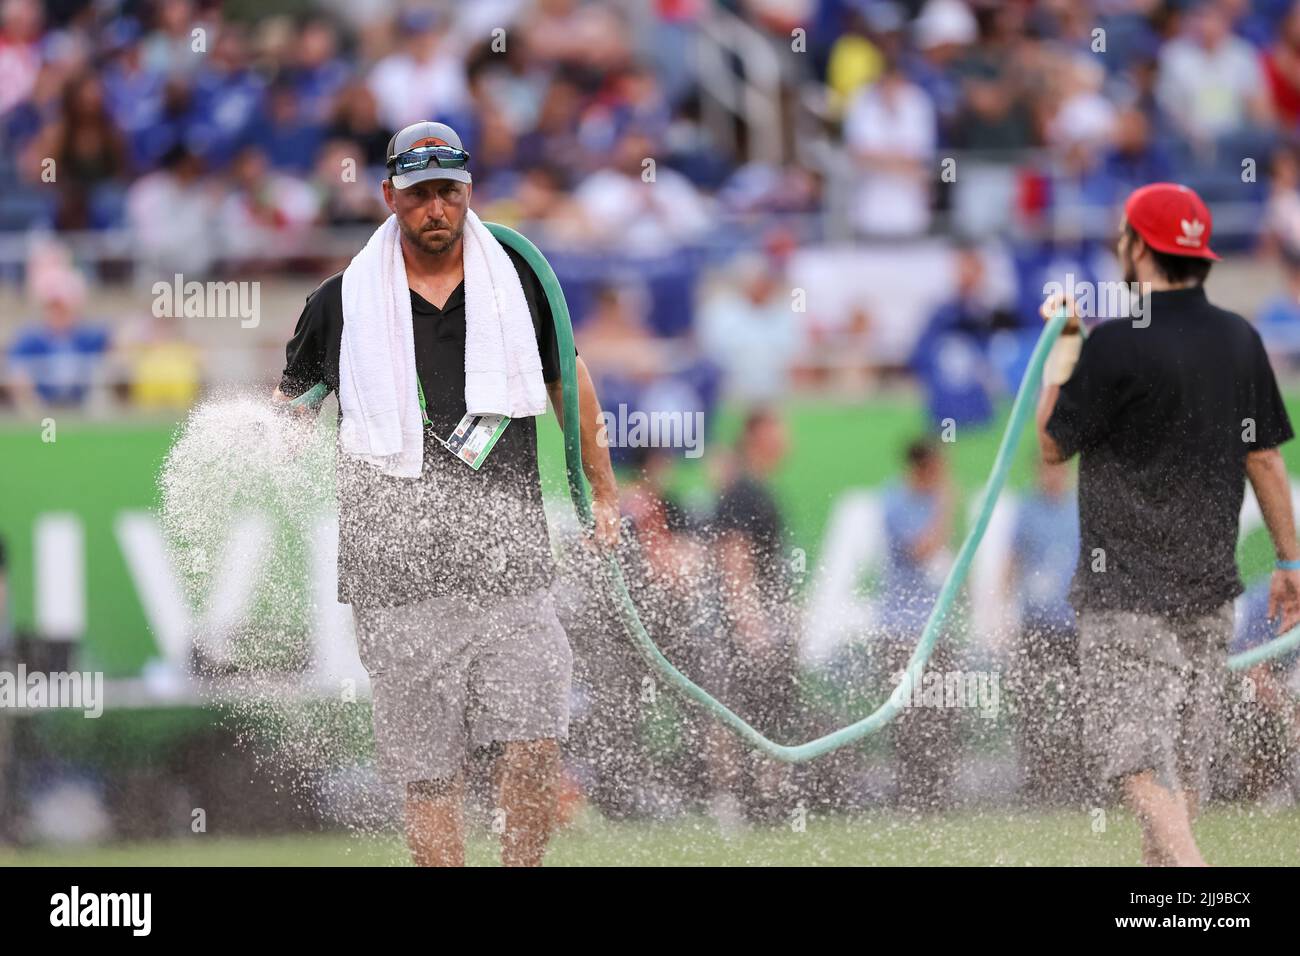 July 23, 2022: The field crew water the field before the match during the Florida Cup Series Arsenal vs Chelsea FC soccer match at Camping World Stadium in Orlando, Fl on July 23, 2022. (Credit Image: © Cory Knowlton/ZUMA Press Wire) Stock Photo